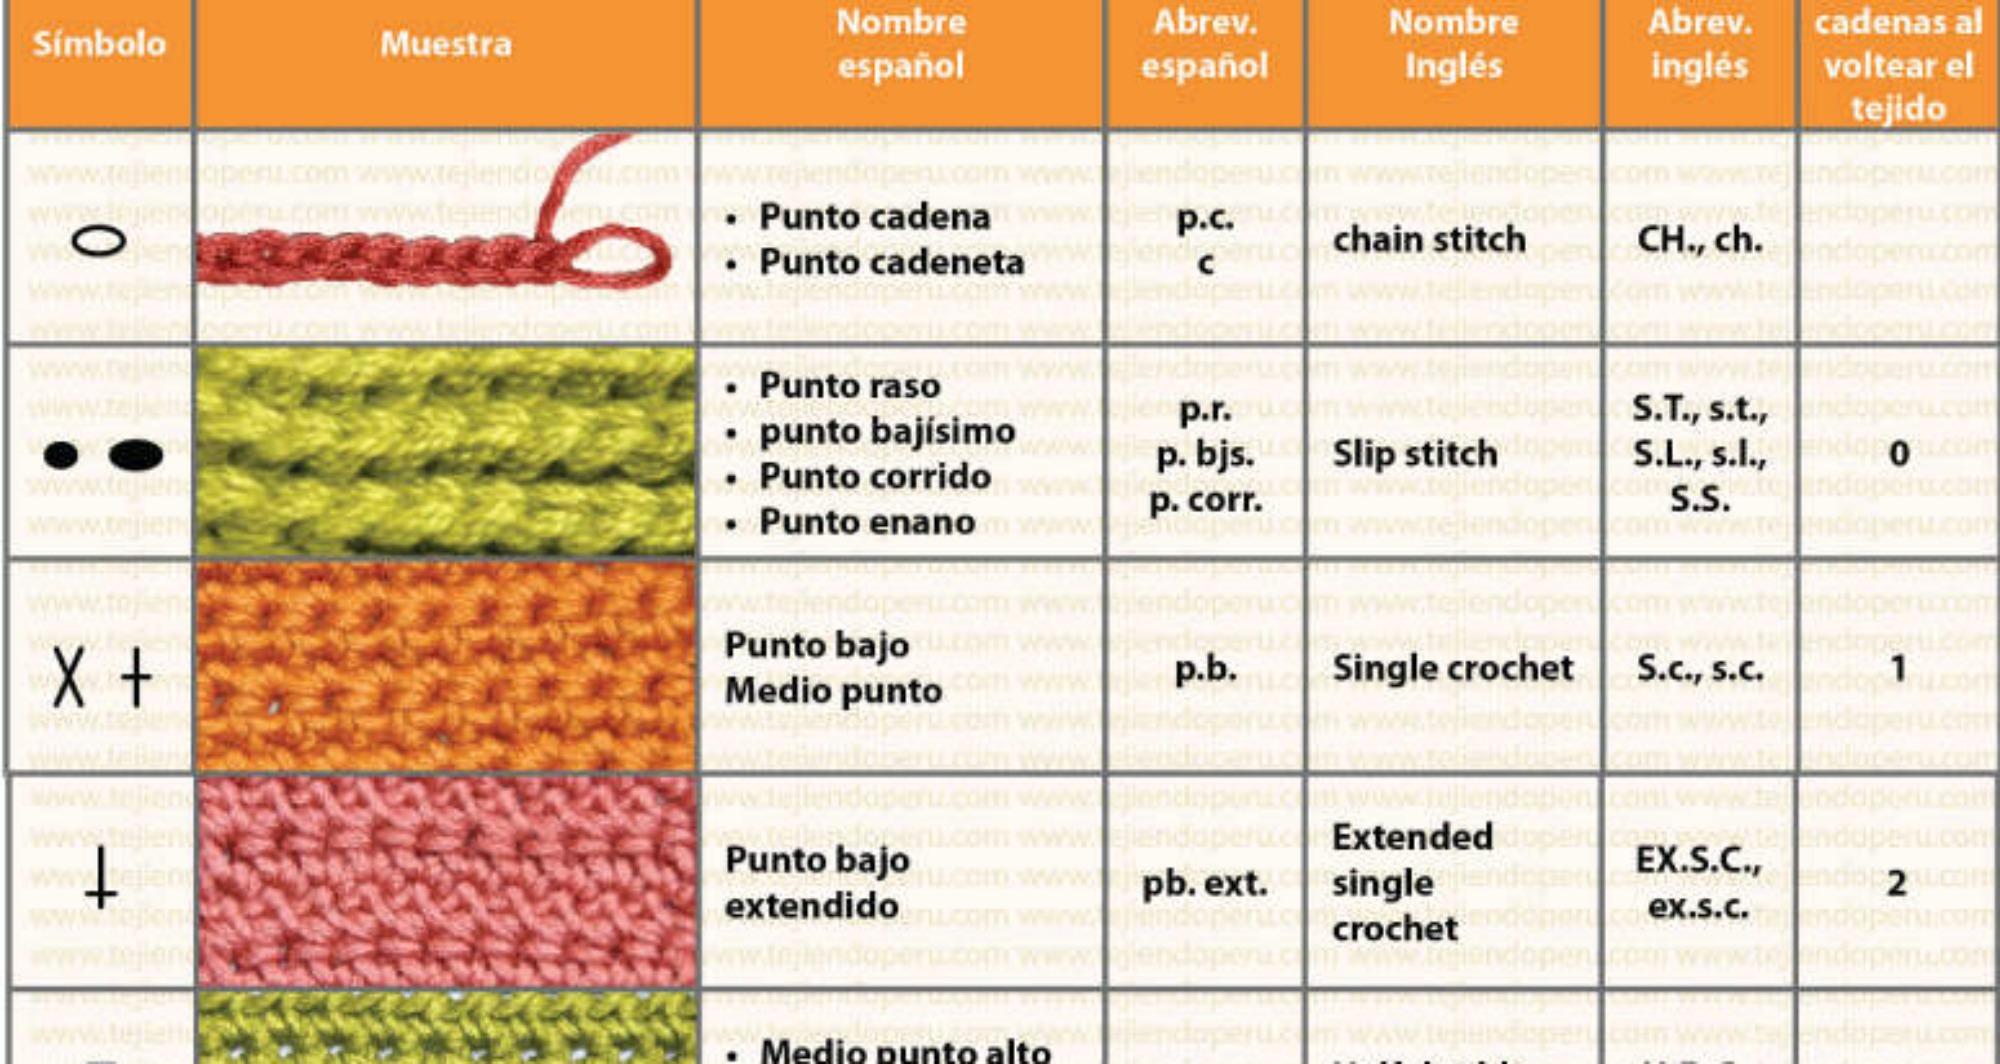 Crochet Abbreviations And Pictures - Best Crochet Pattern